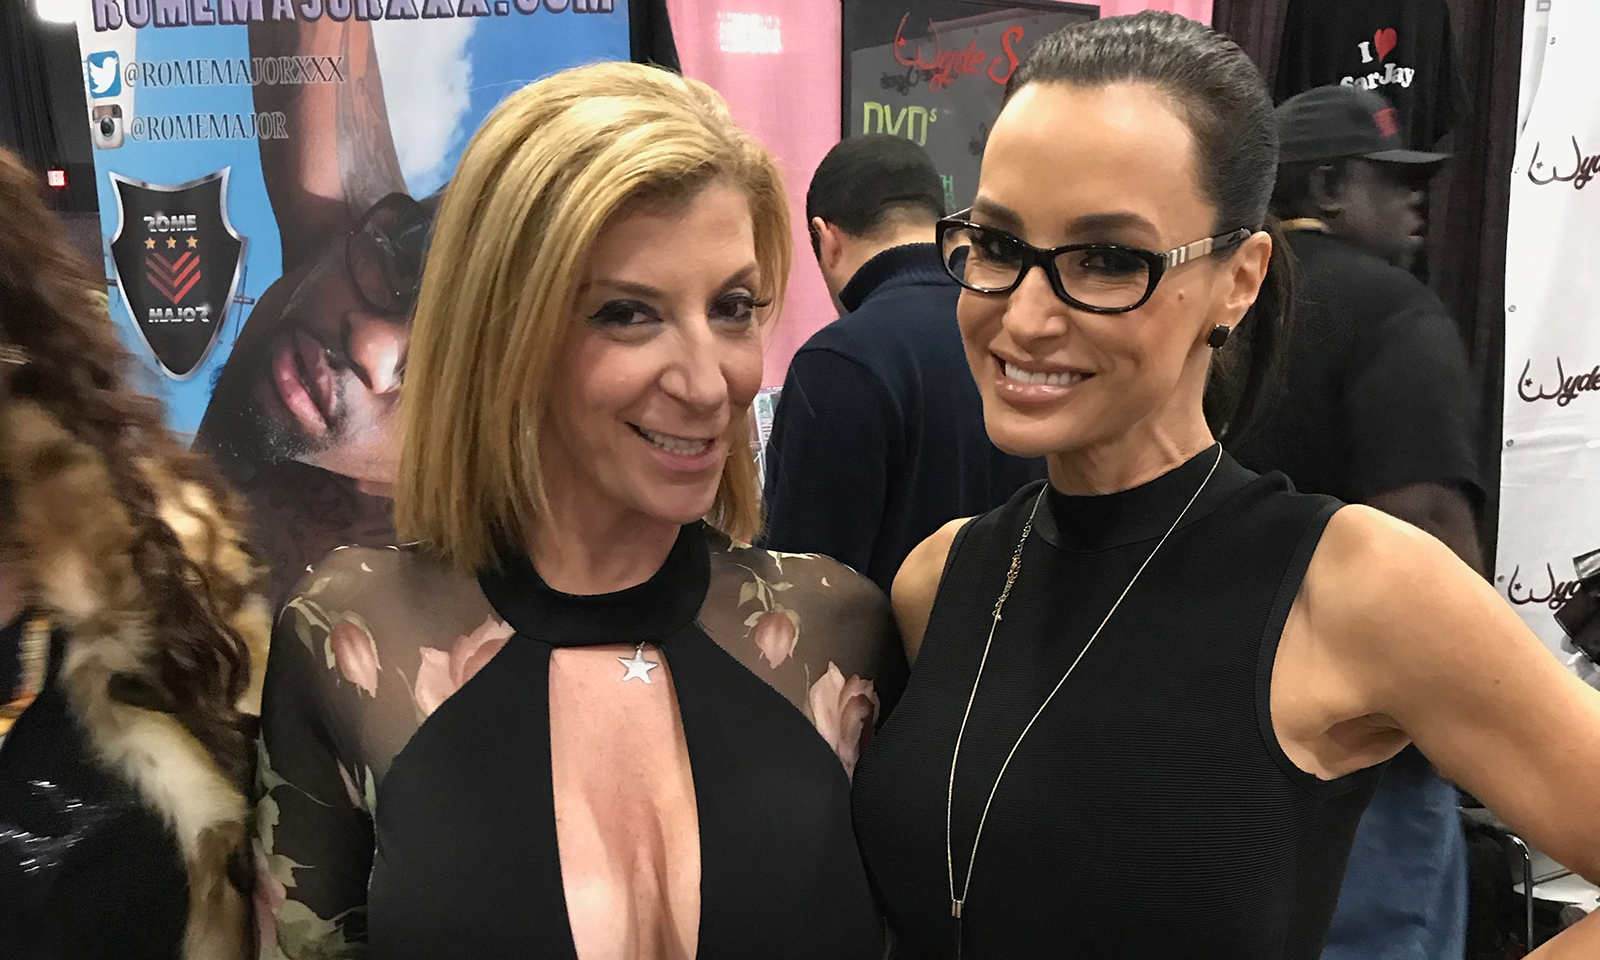 barry mosier recommends lisa ann and sara jay pic